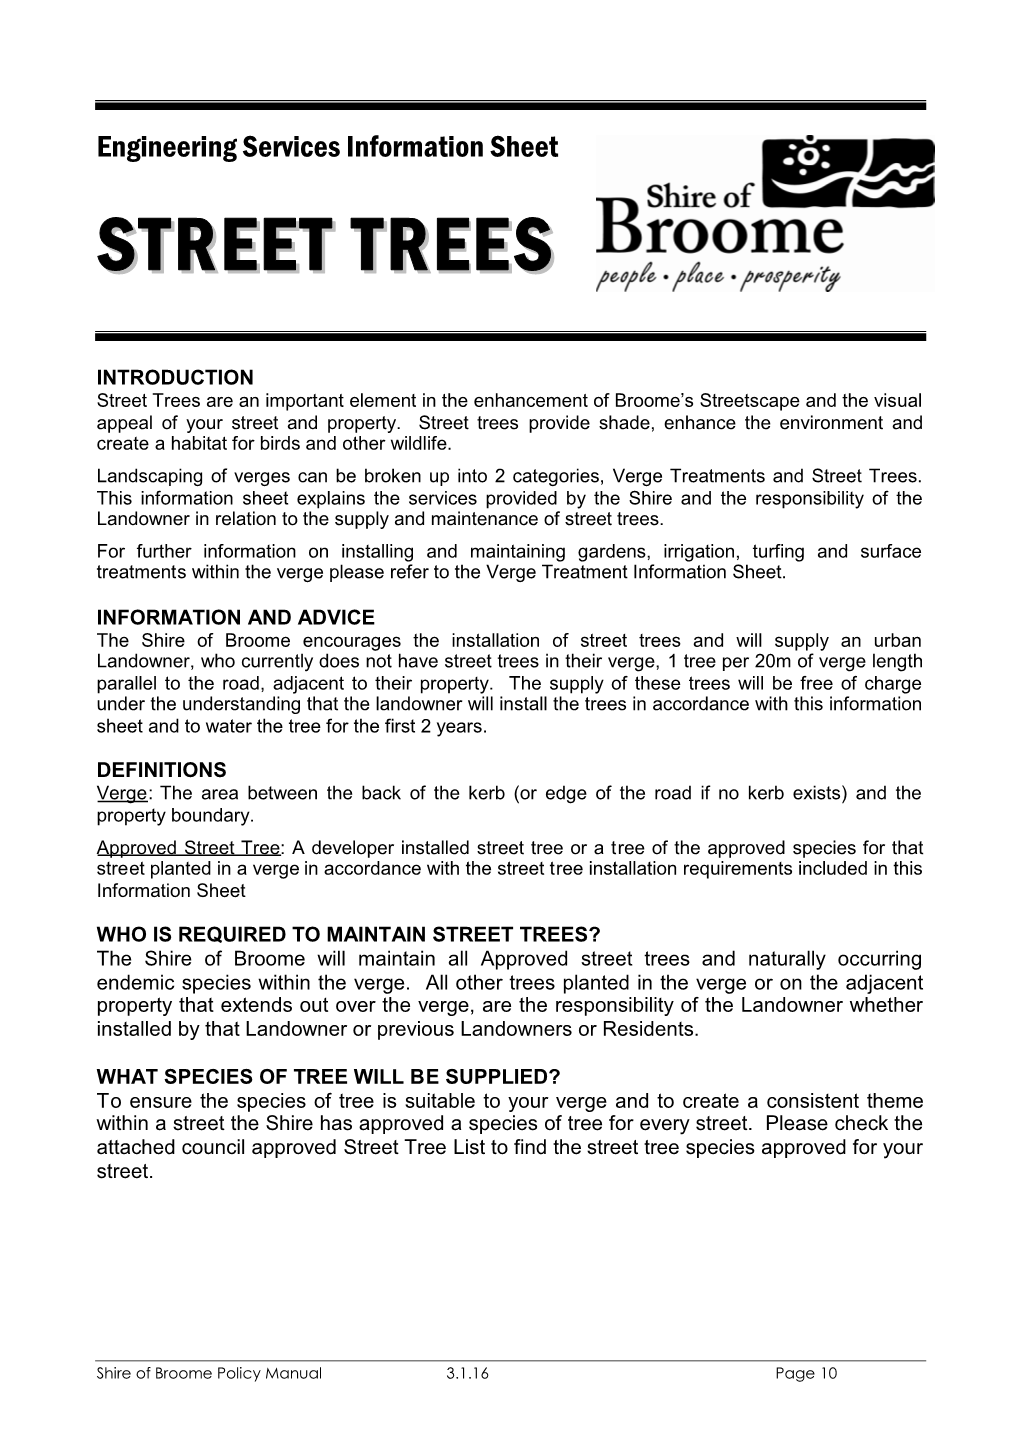 Street Trees Are an Important Element in the Enhancement of Broome’S Streetscape and the Visual Appeal of Your Street and Property